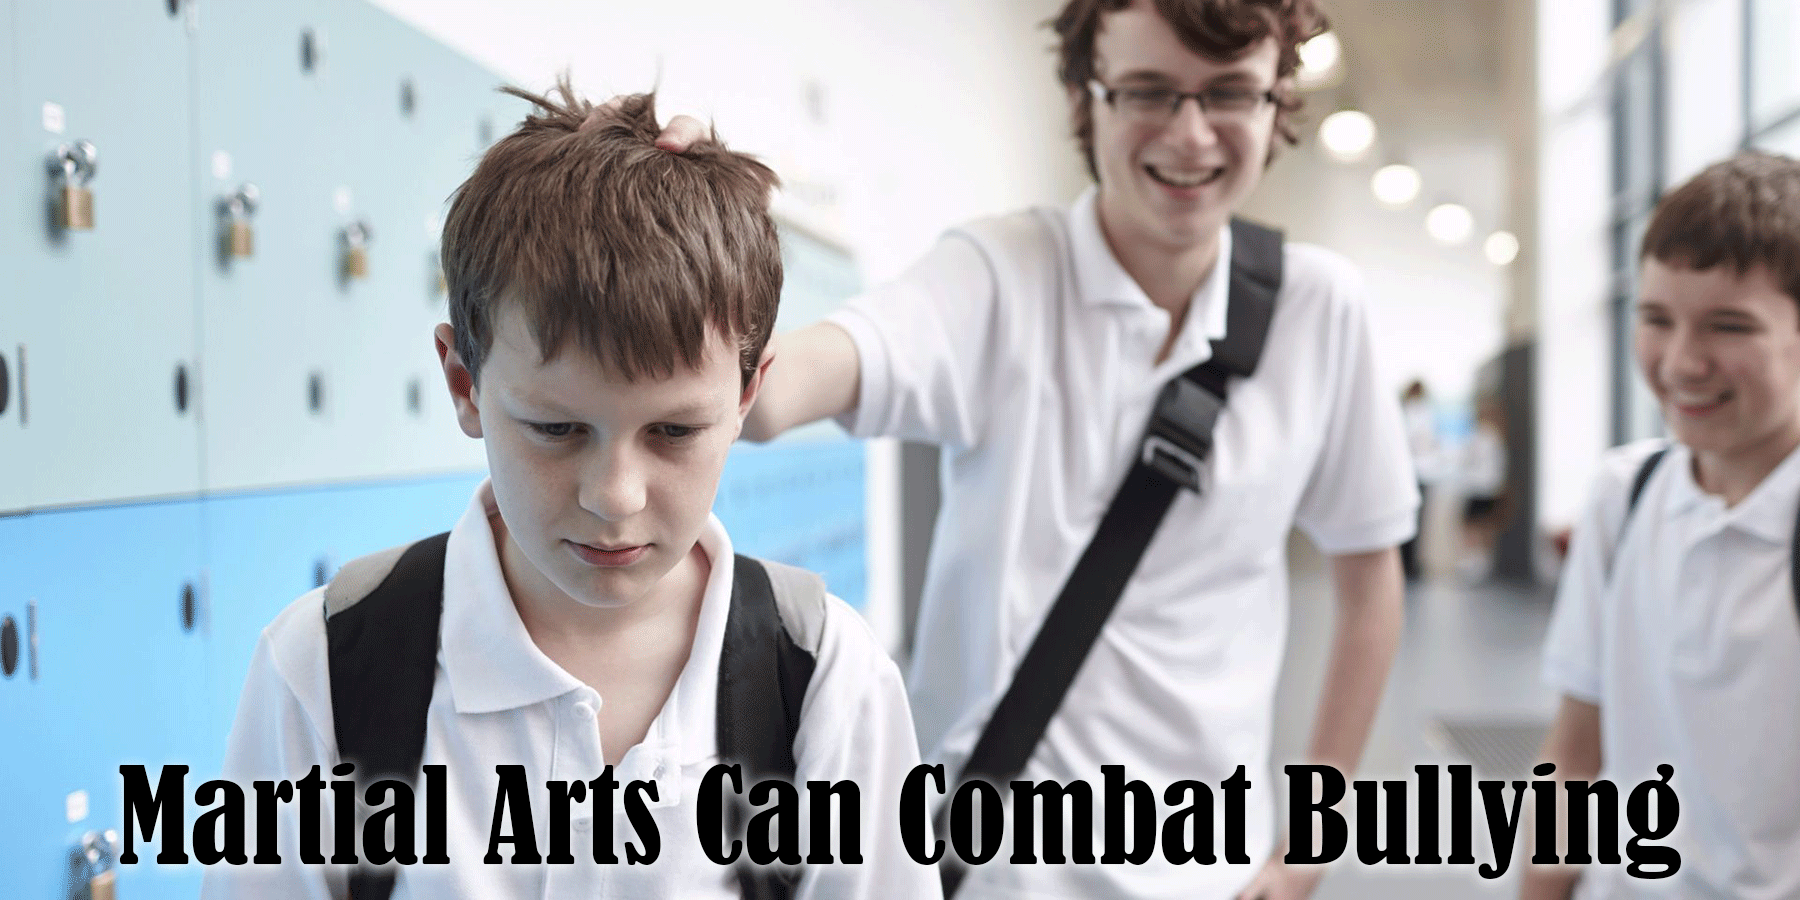 How Learning Martial Arts Can Stop Bullying